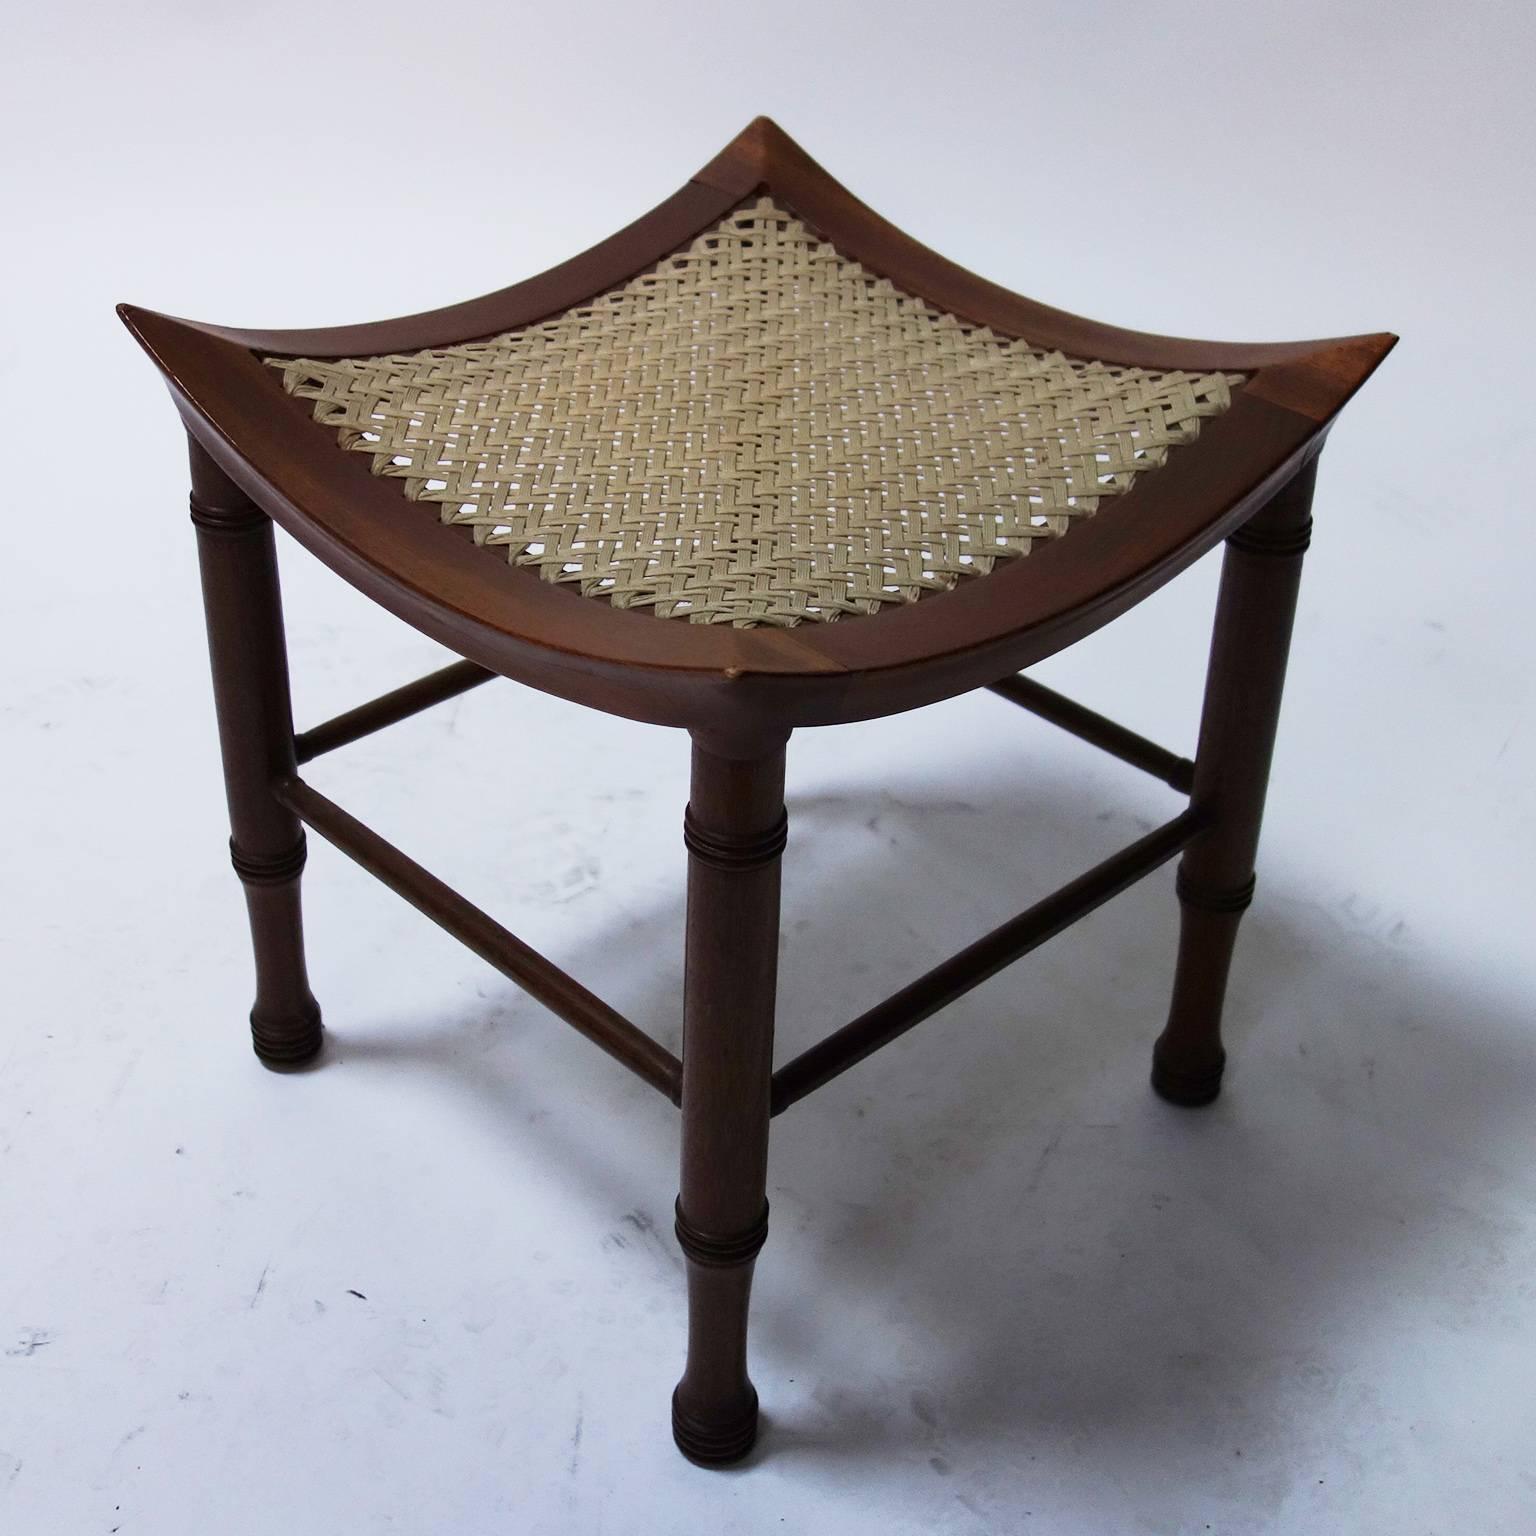 Woven Pair of Arts & Crafts 'Thebes' Stools by Liberty & Co